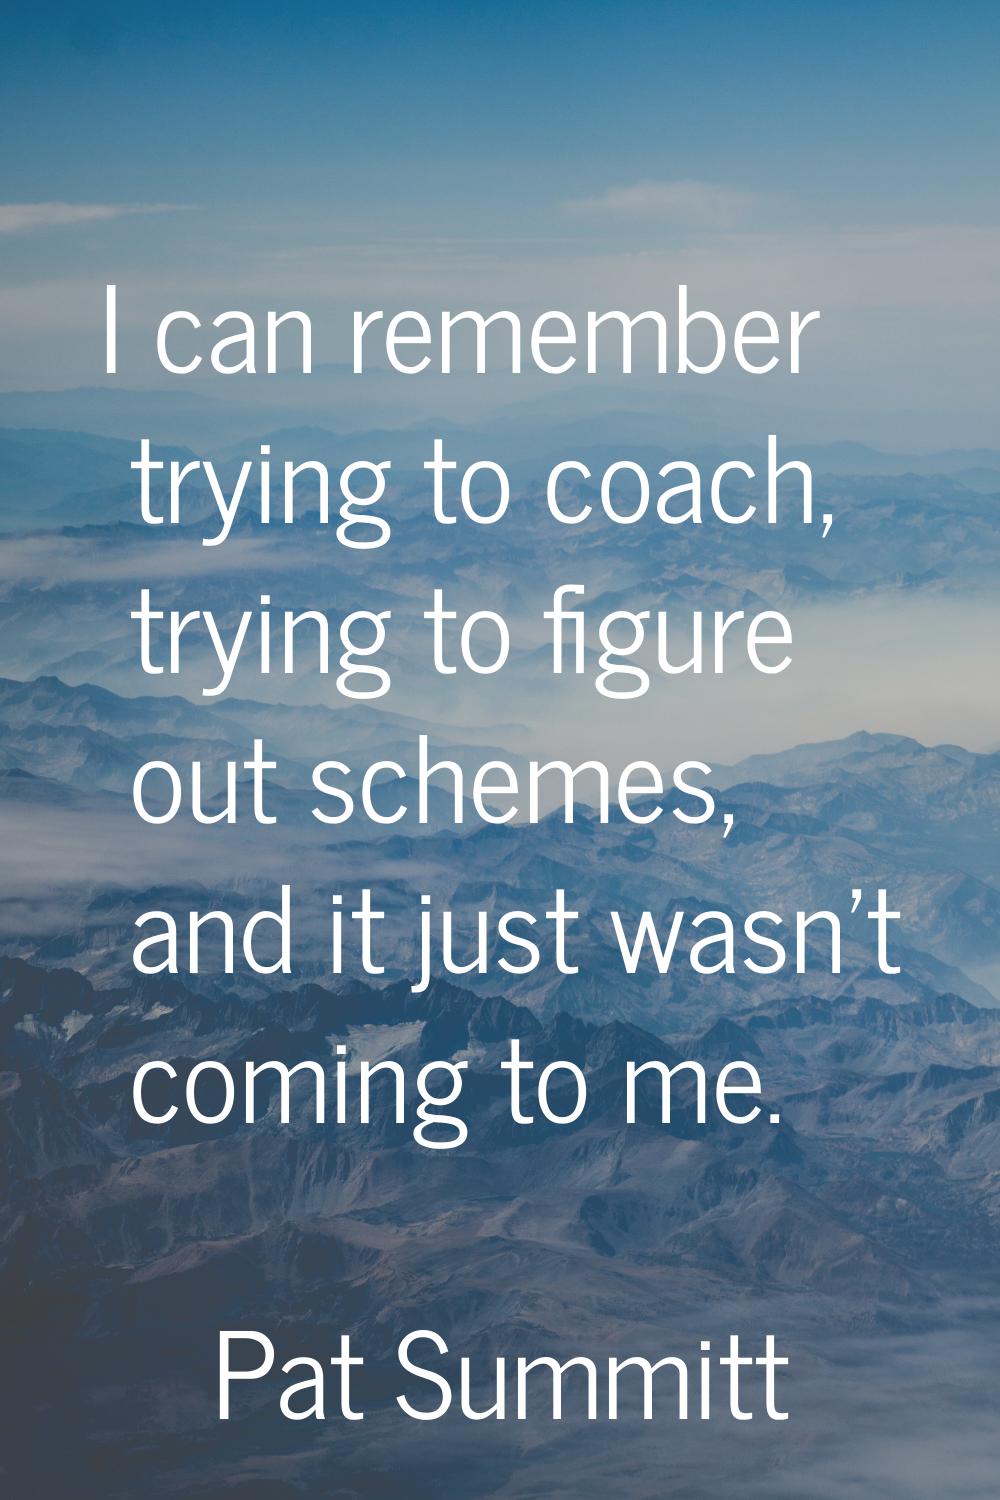 I can remember trying to coach, trying to figure out schemes, and it just wasn't coming to me.